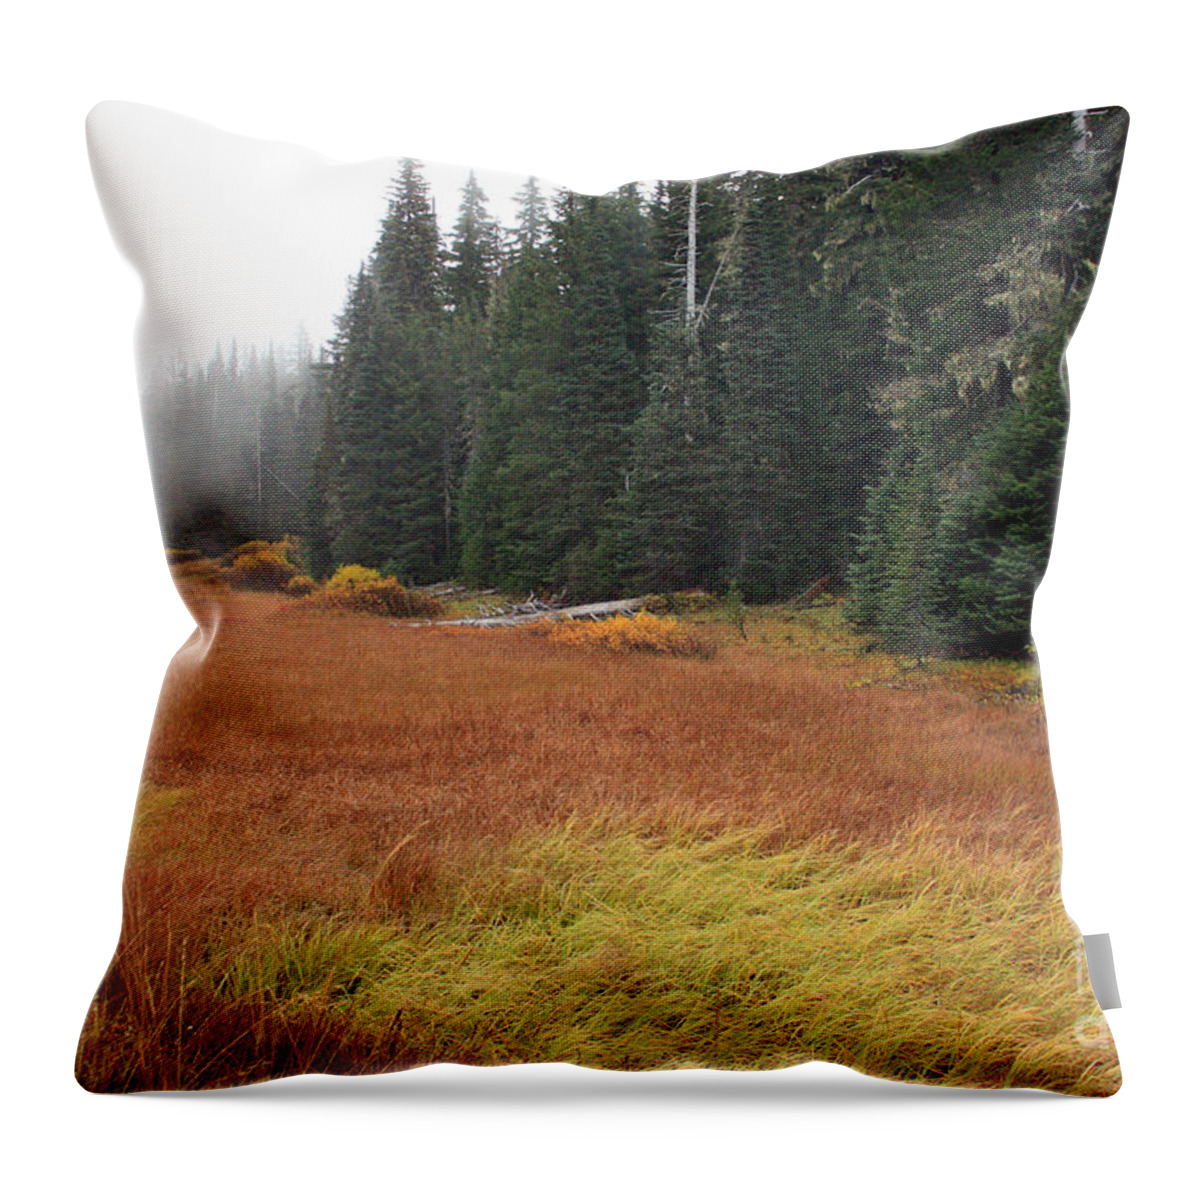 Meadow Throw Pillow featuring the photograph Autumn Meadow by Kami McKeon